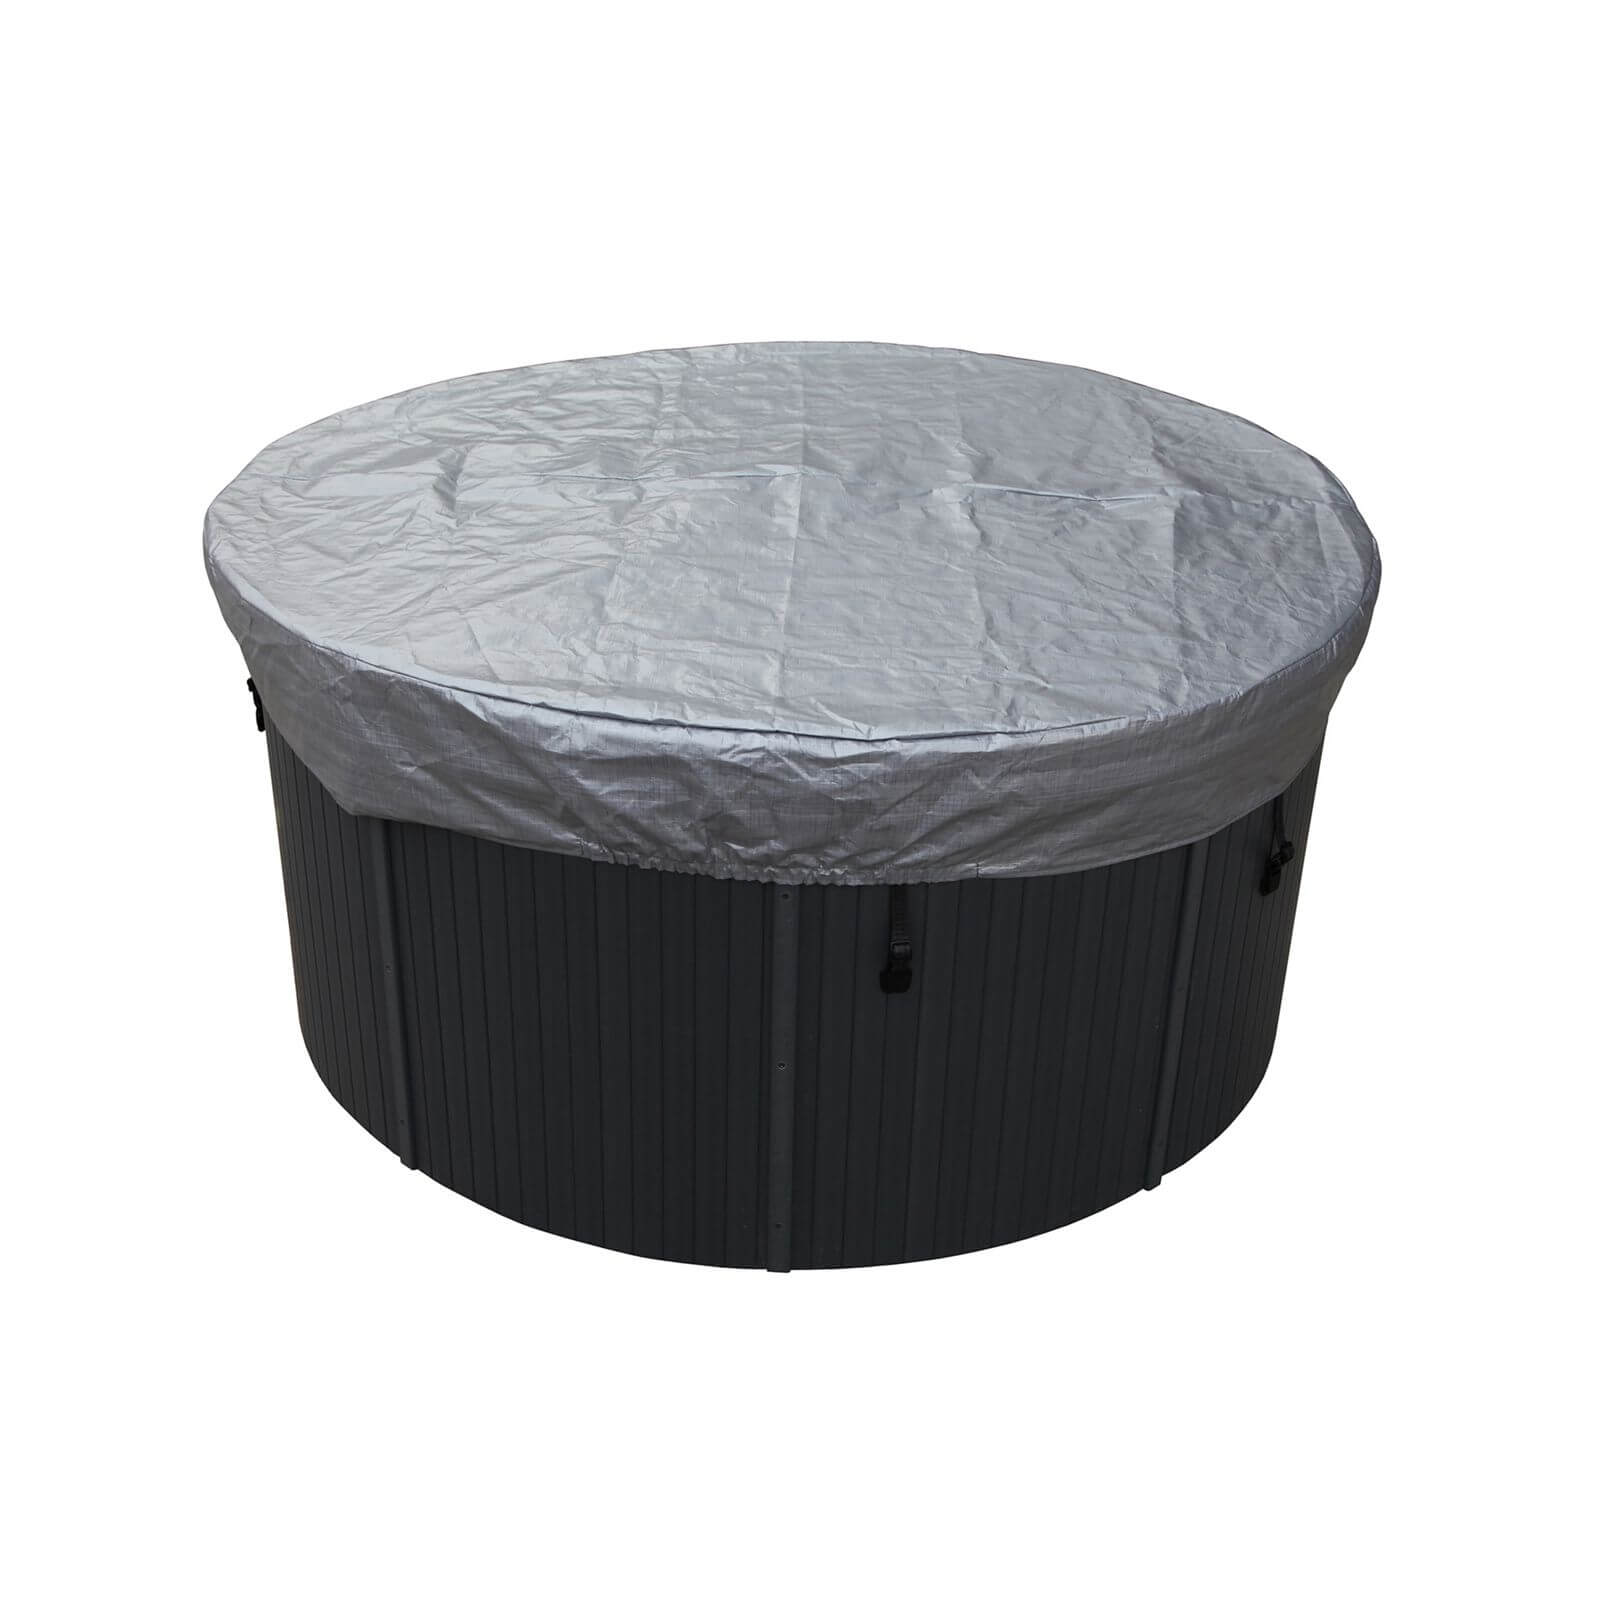 Photo of Canadian Spa Round Spa Cover Guard - 84in